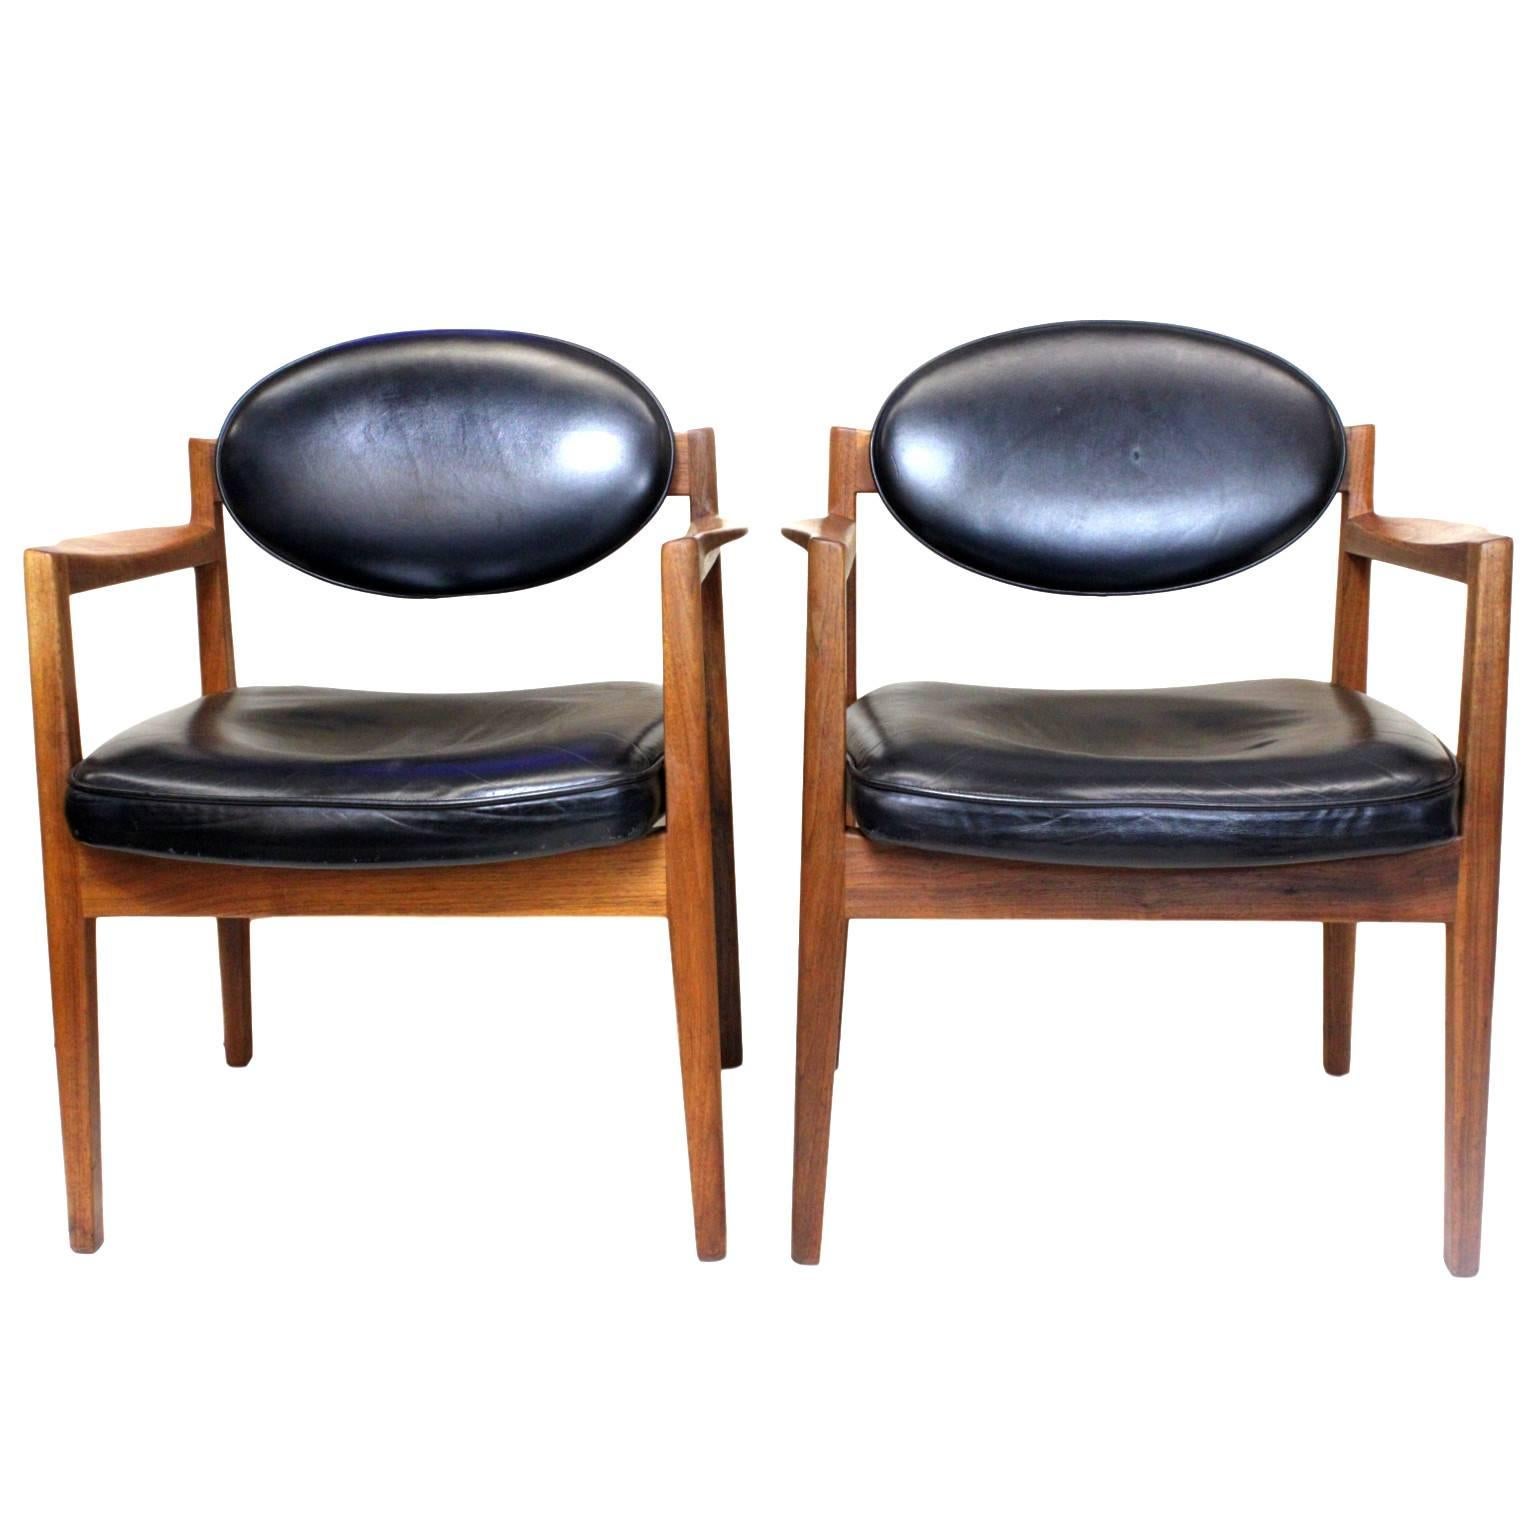 A fantastic set of Mid-Century Modern black leather and walnut club chairs by Danish American designer Jens Risom. From the early 1960s, these chairs are in excellent vintage condition. Chairs feature a gorgeous, sculptural design, beautifully